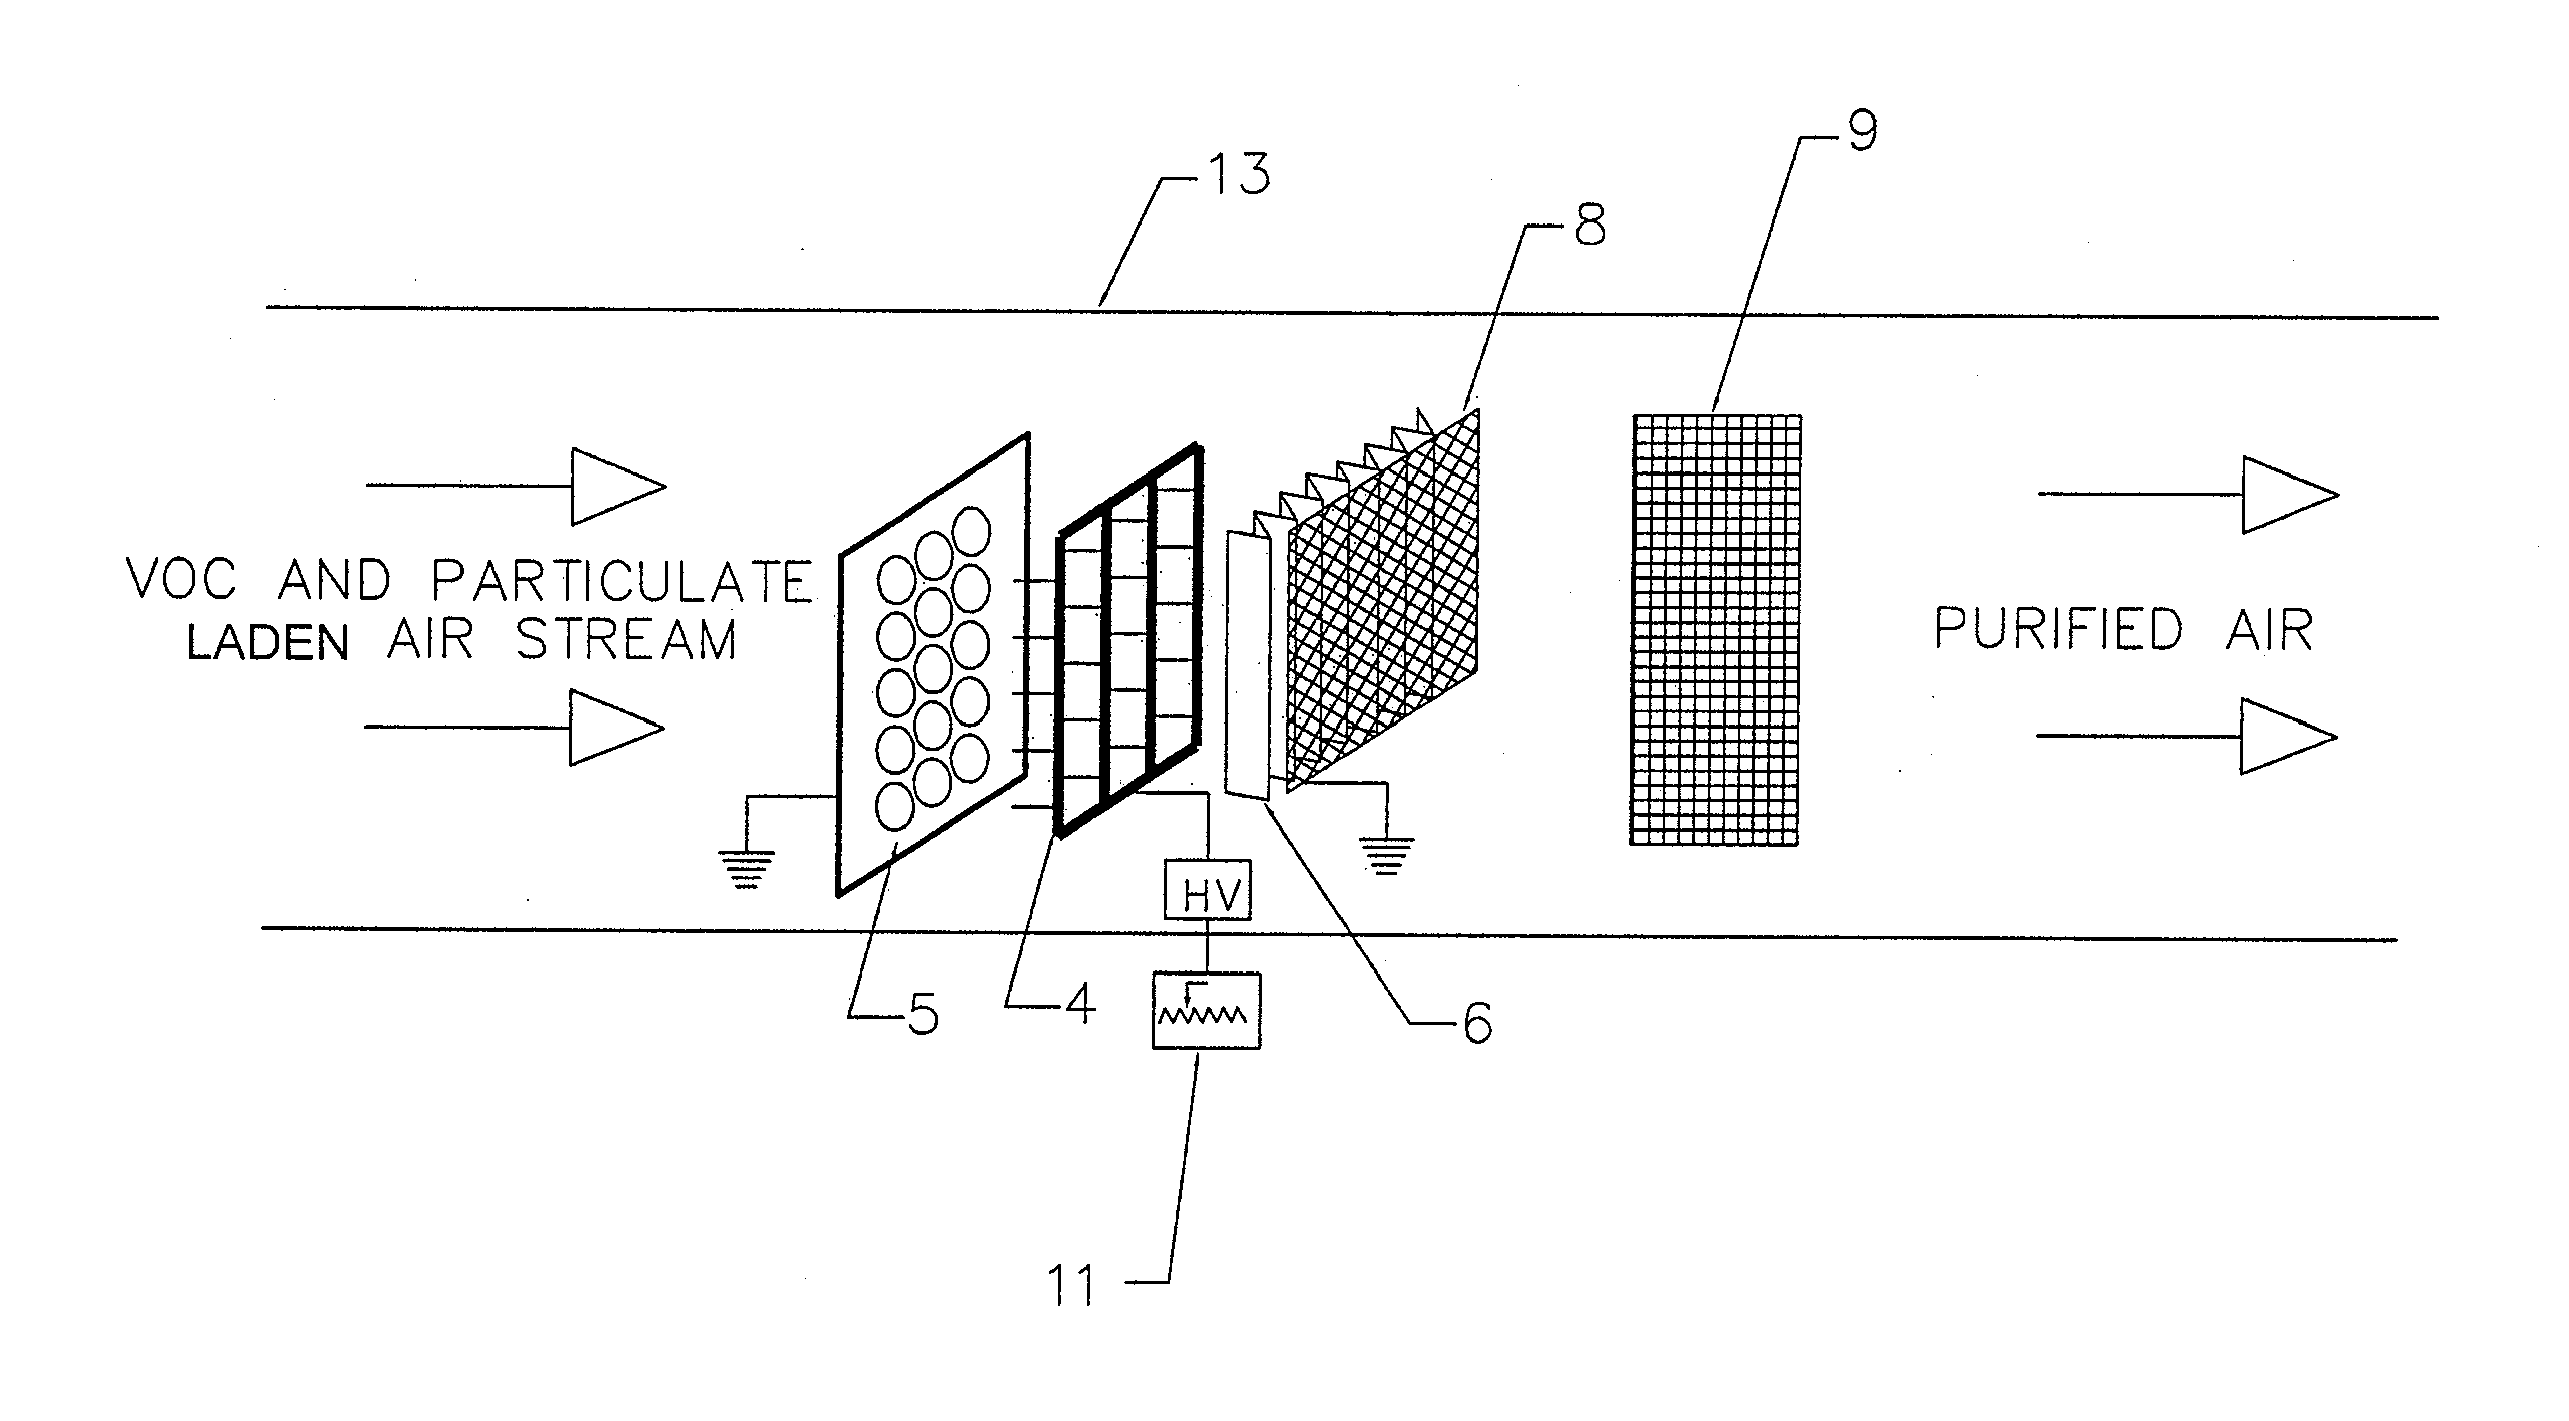 Apparatus and Method for Removal of Particles and VOC from an Airstream